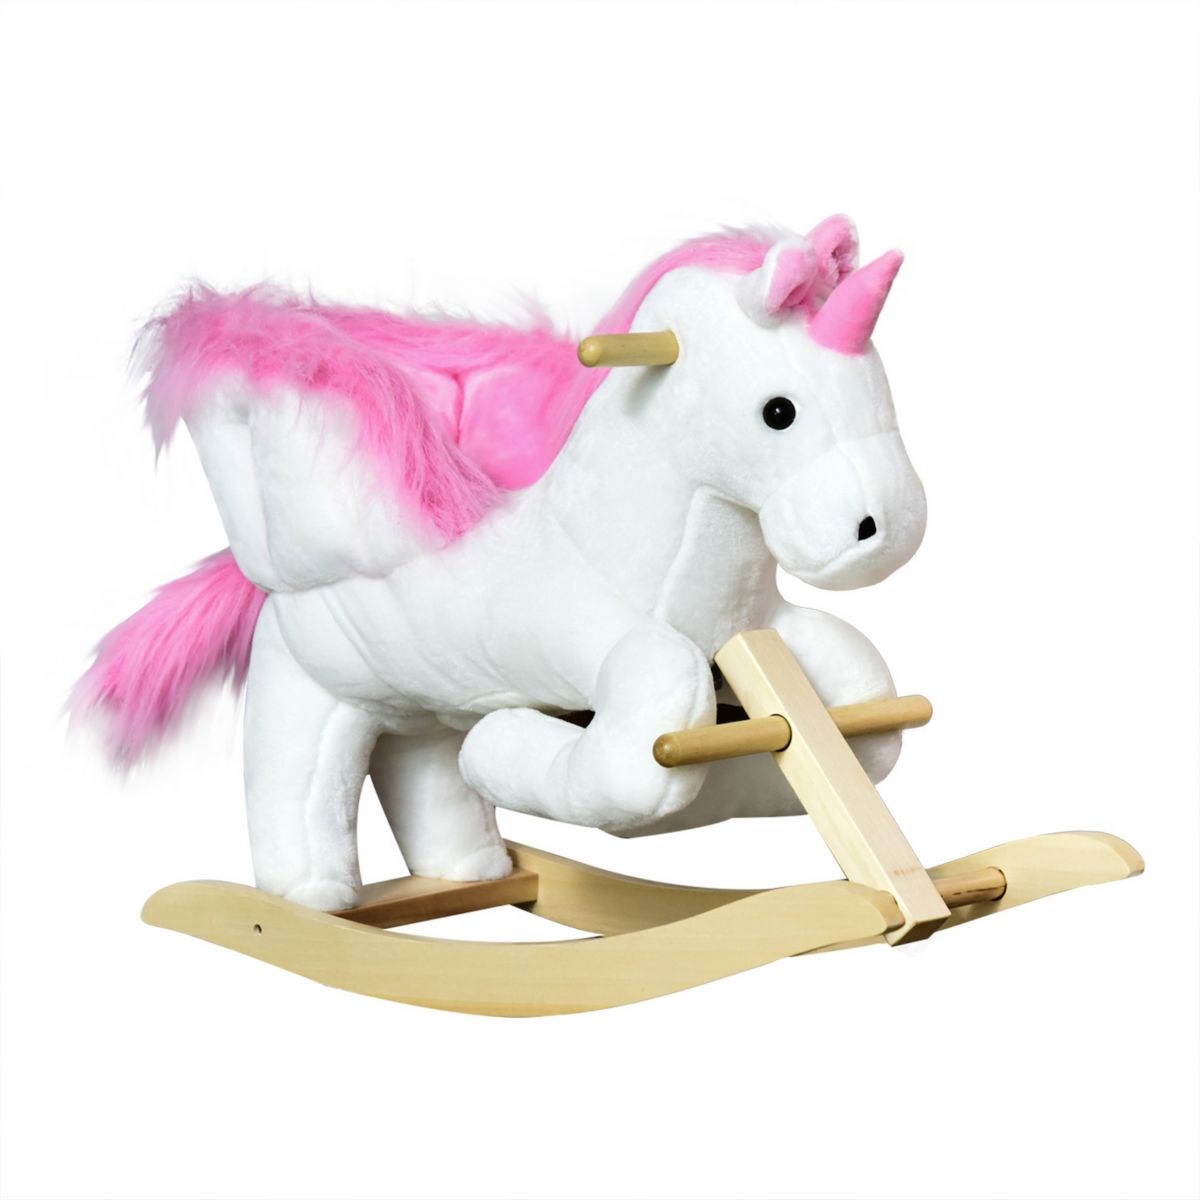 Qaba Kids Rocking Horse Wooden Plush Ride On Unicorn Chair Toy with Lullby Song for 18 36 months children Qaba